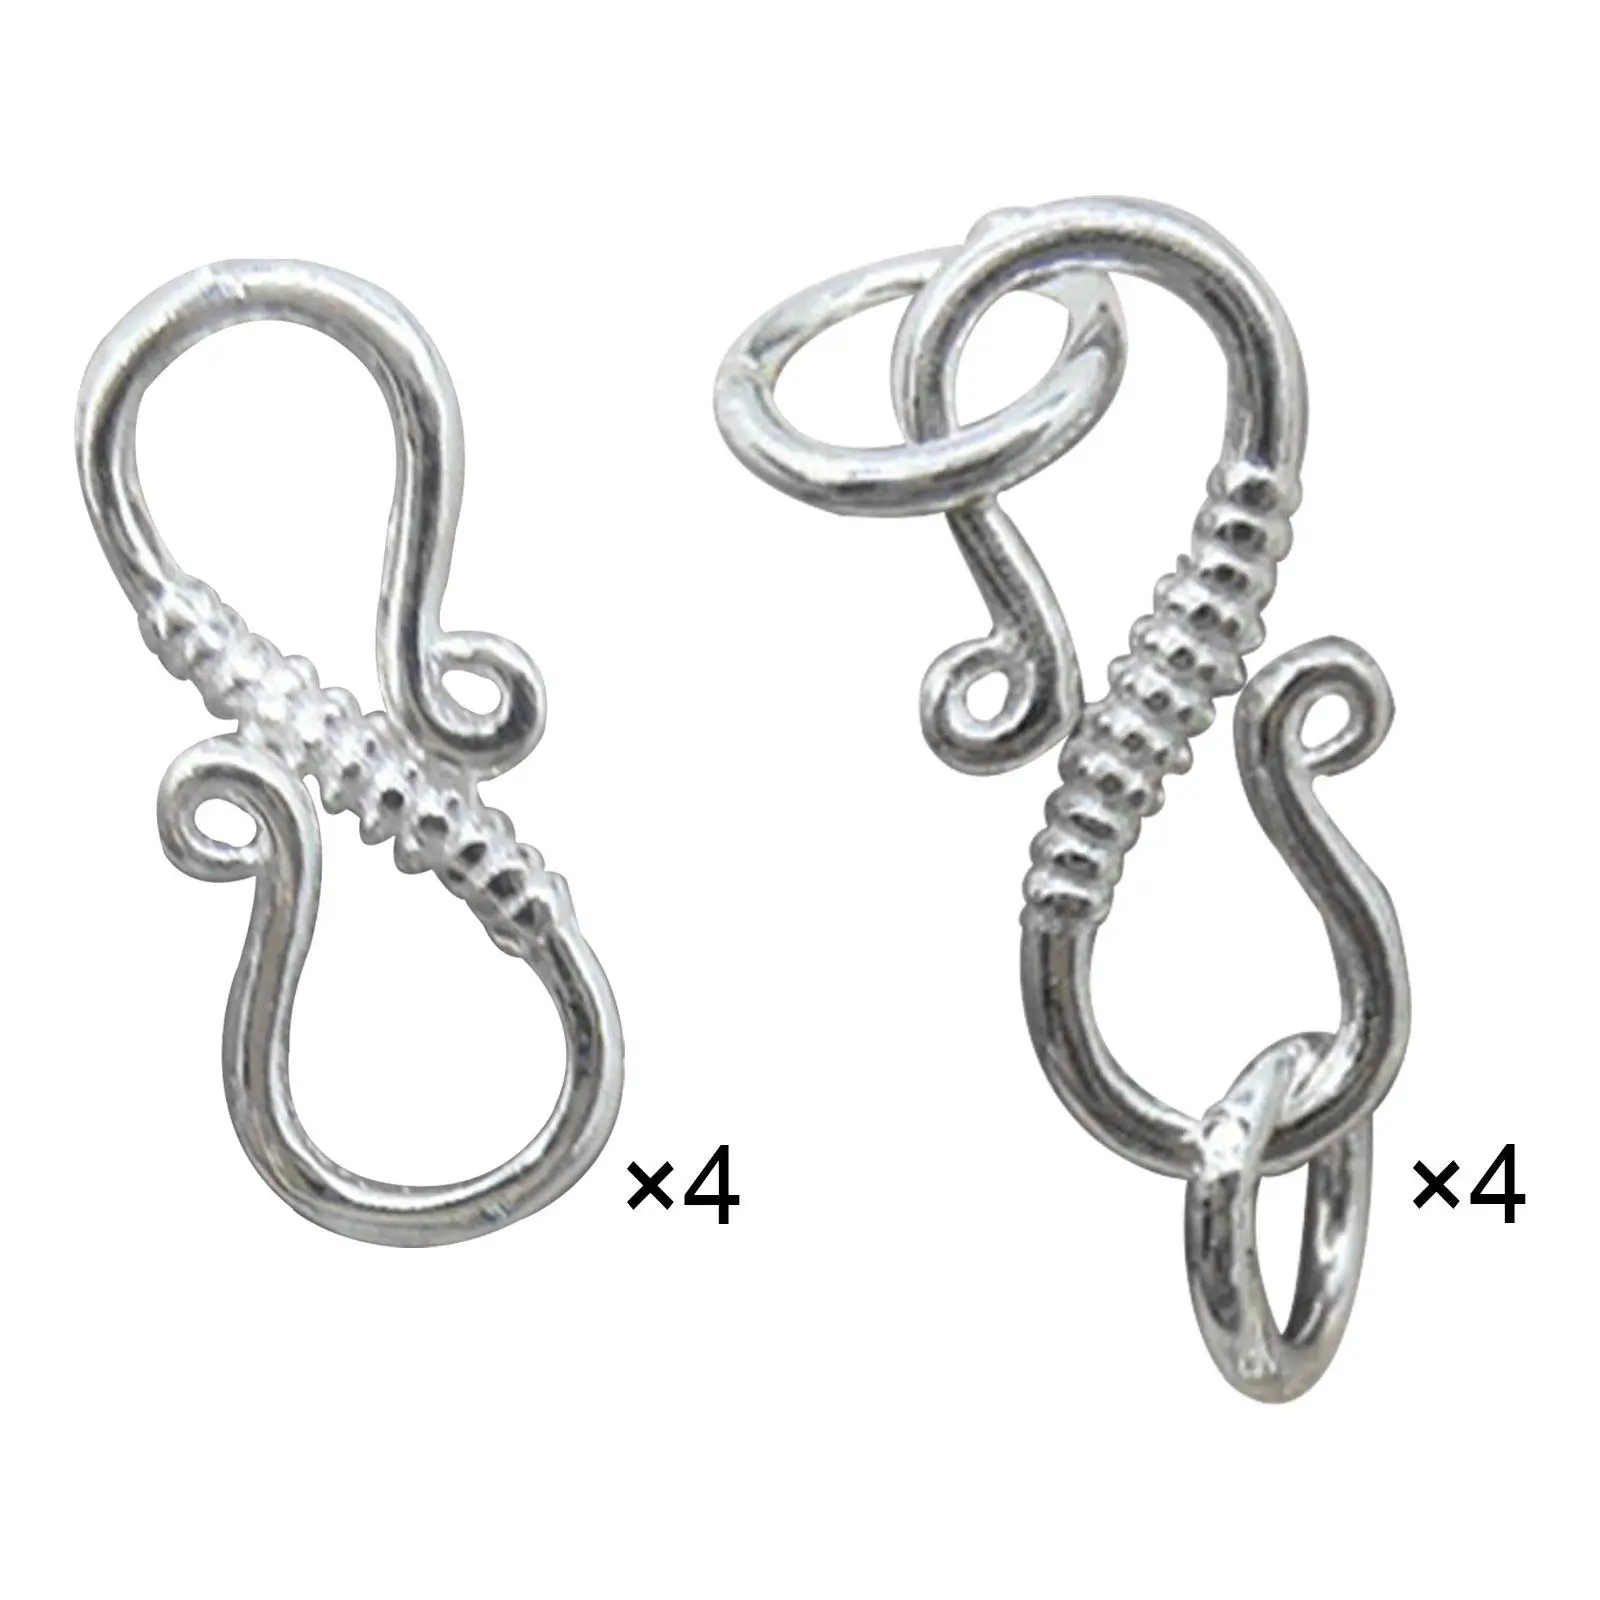 4x Sterling Silver S Hook Clasp 12mm Eye Clasp for Jewelry Clasps DIY Crafts